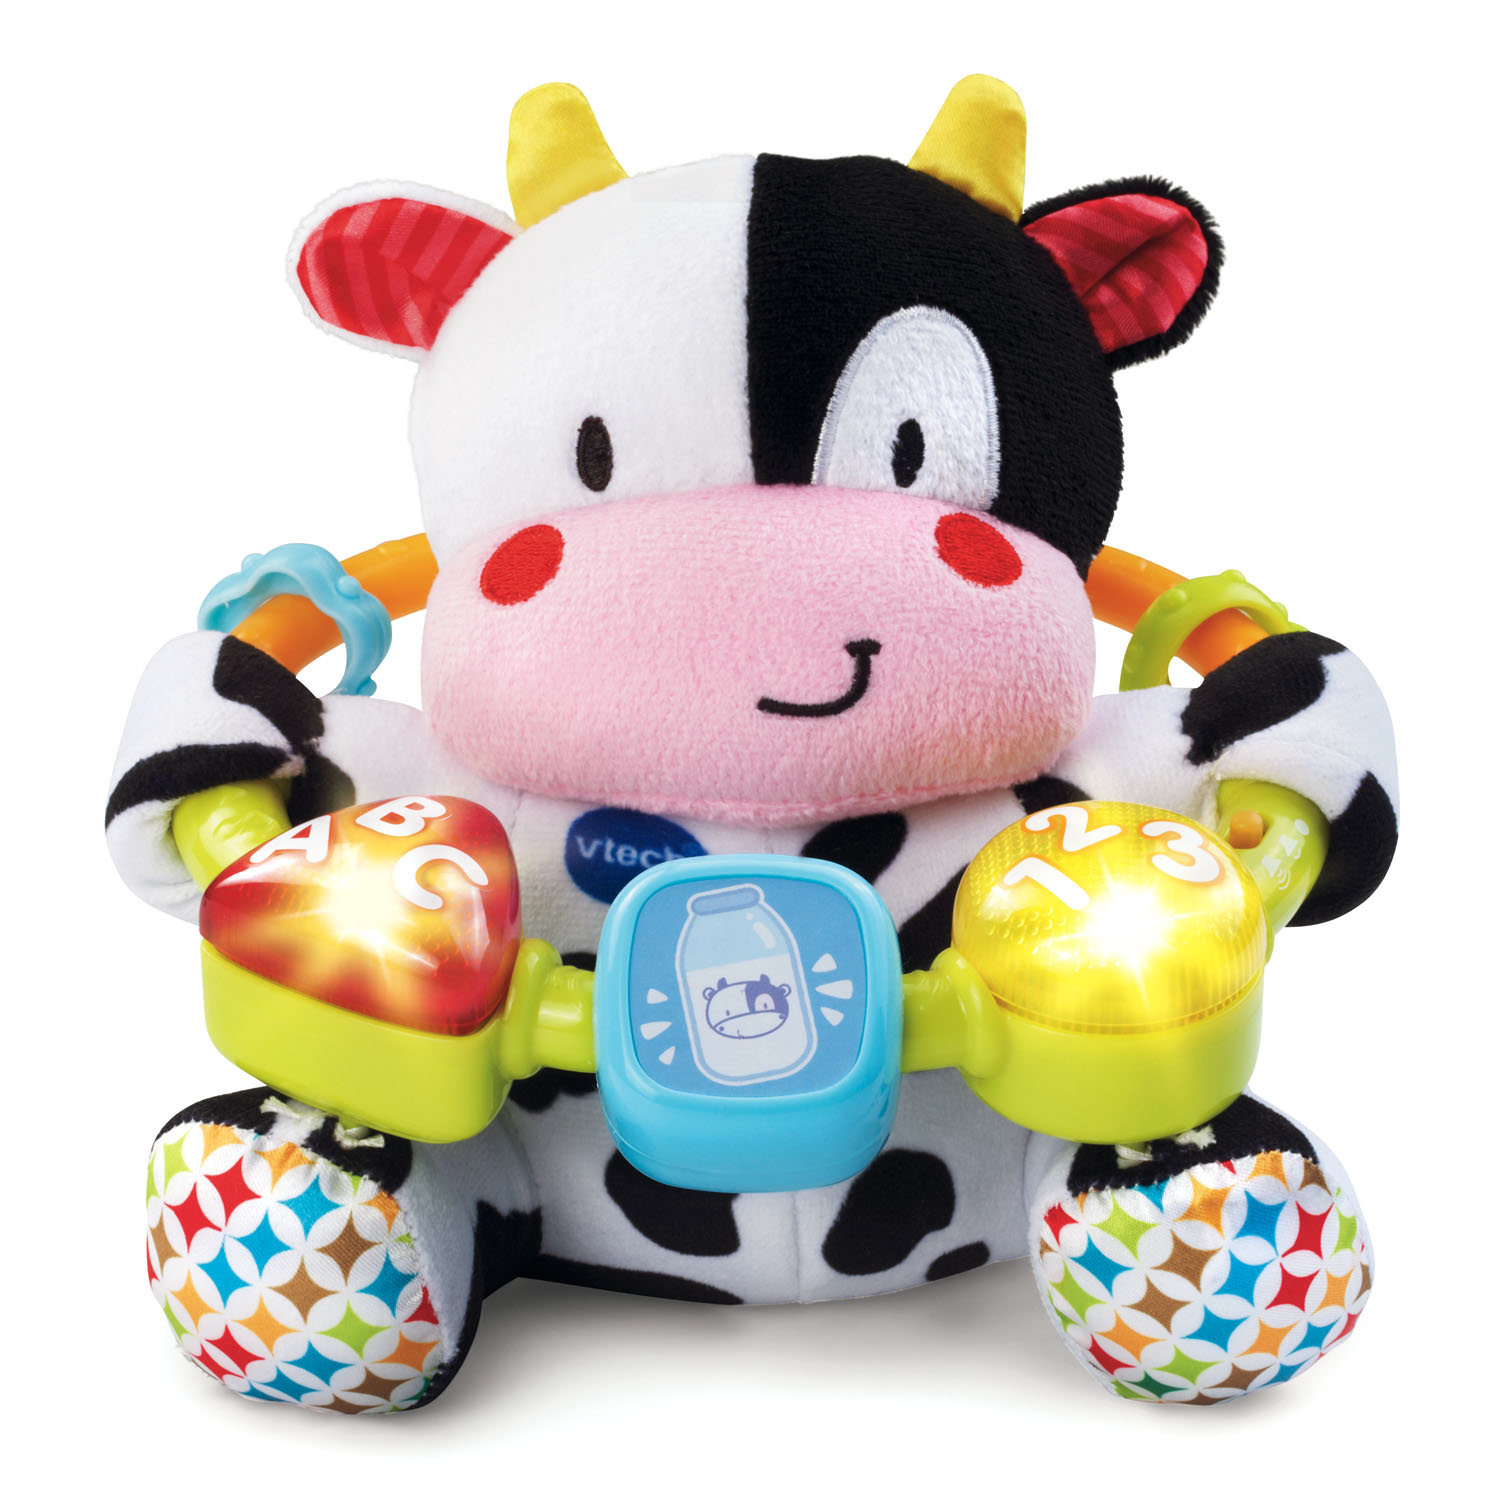 VTech Lil’ Critters Moosical Beads, Plush Cow, Musical Baby Toy